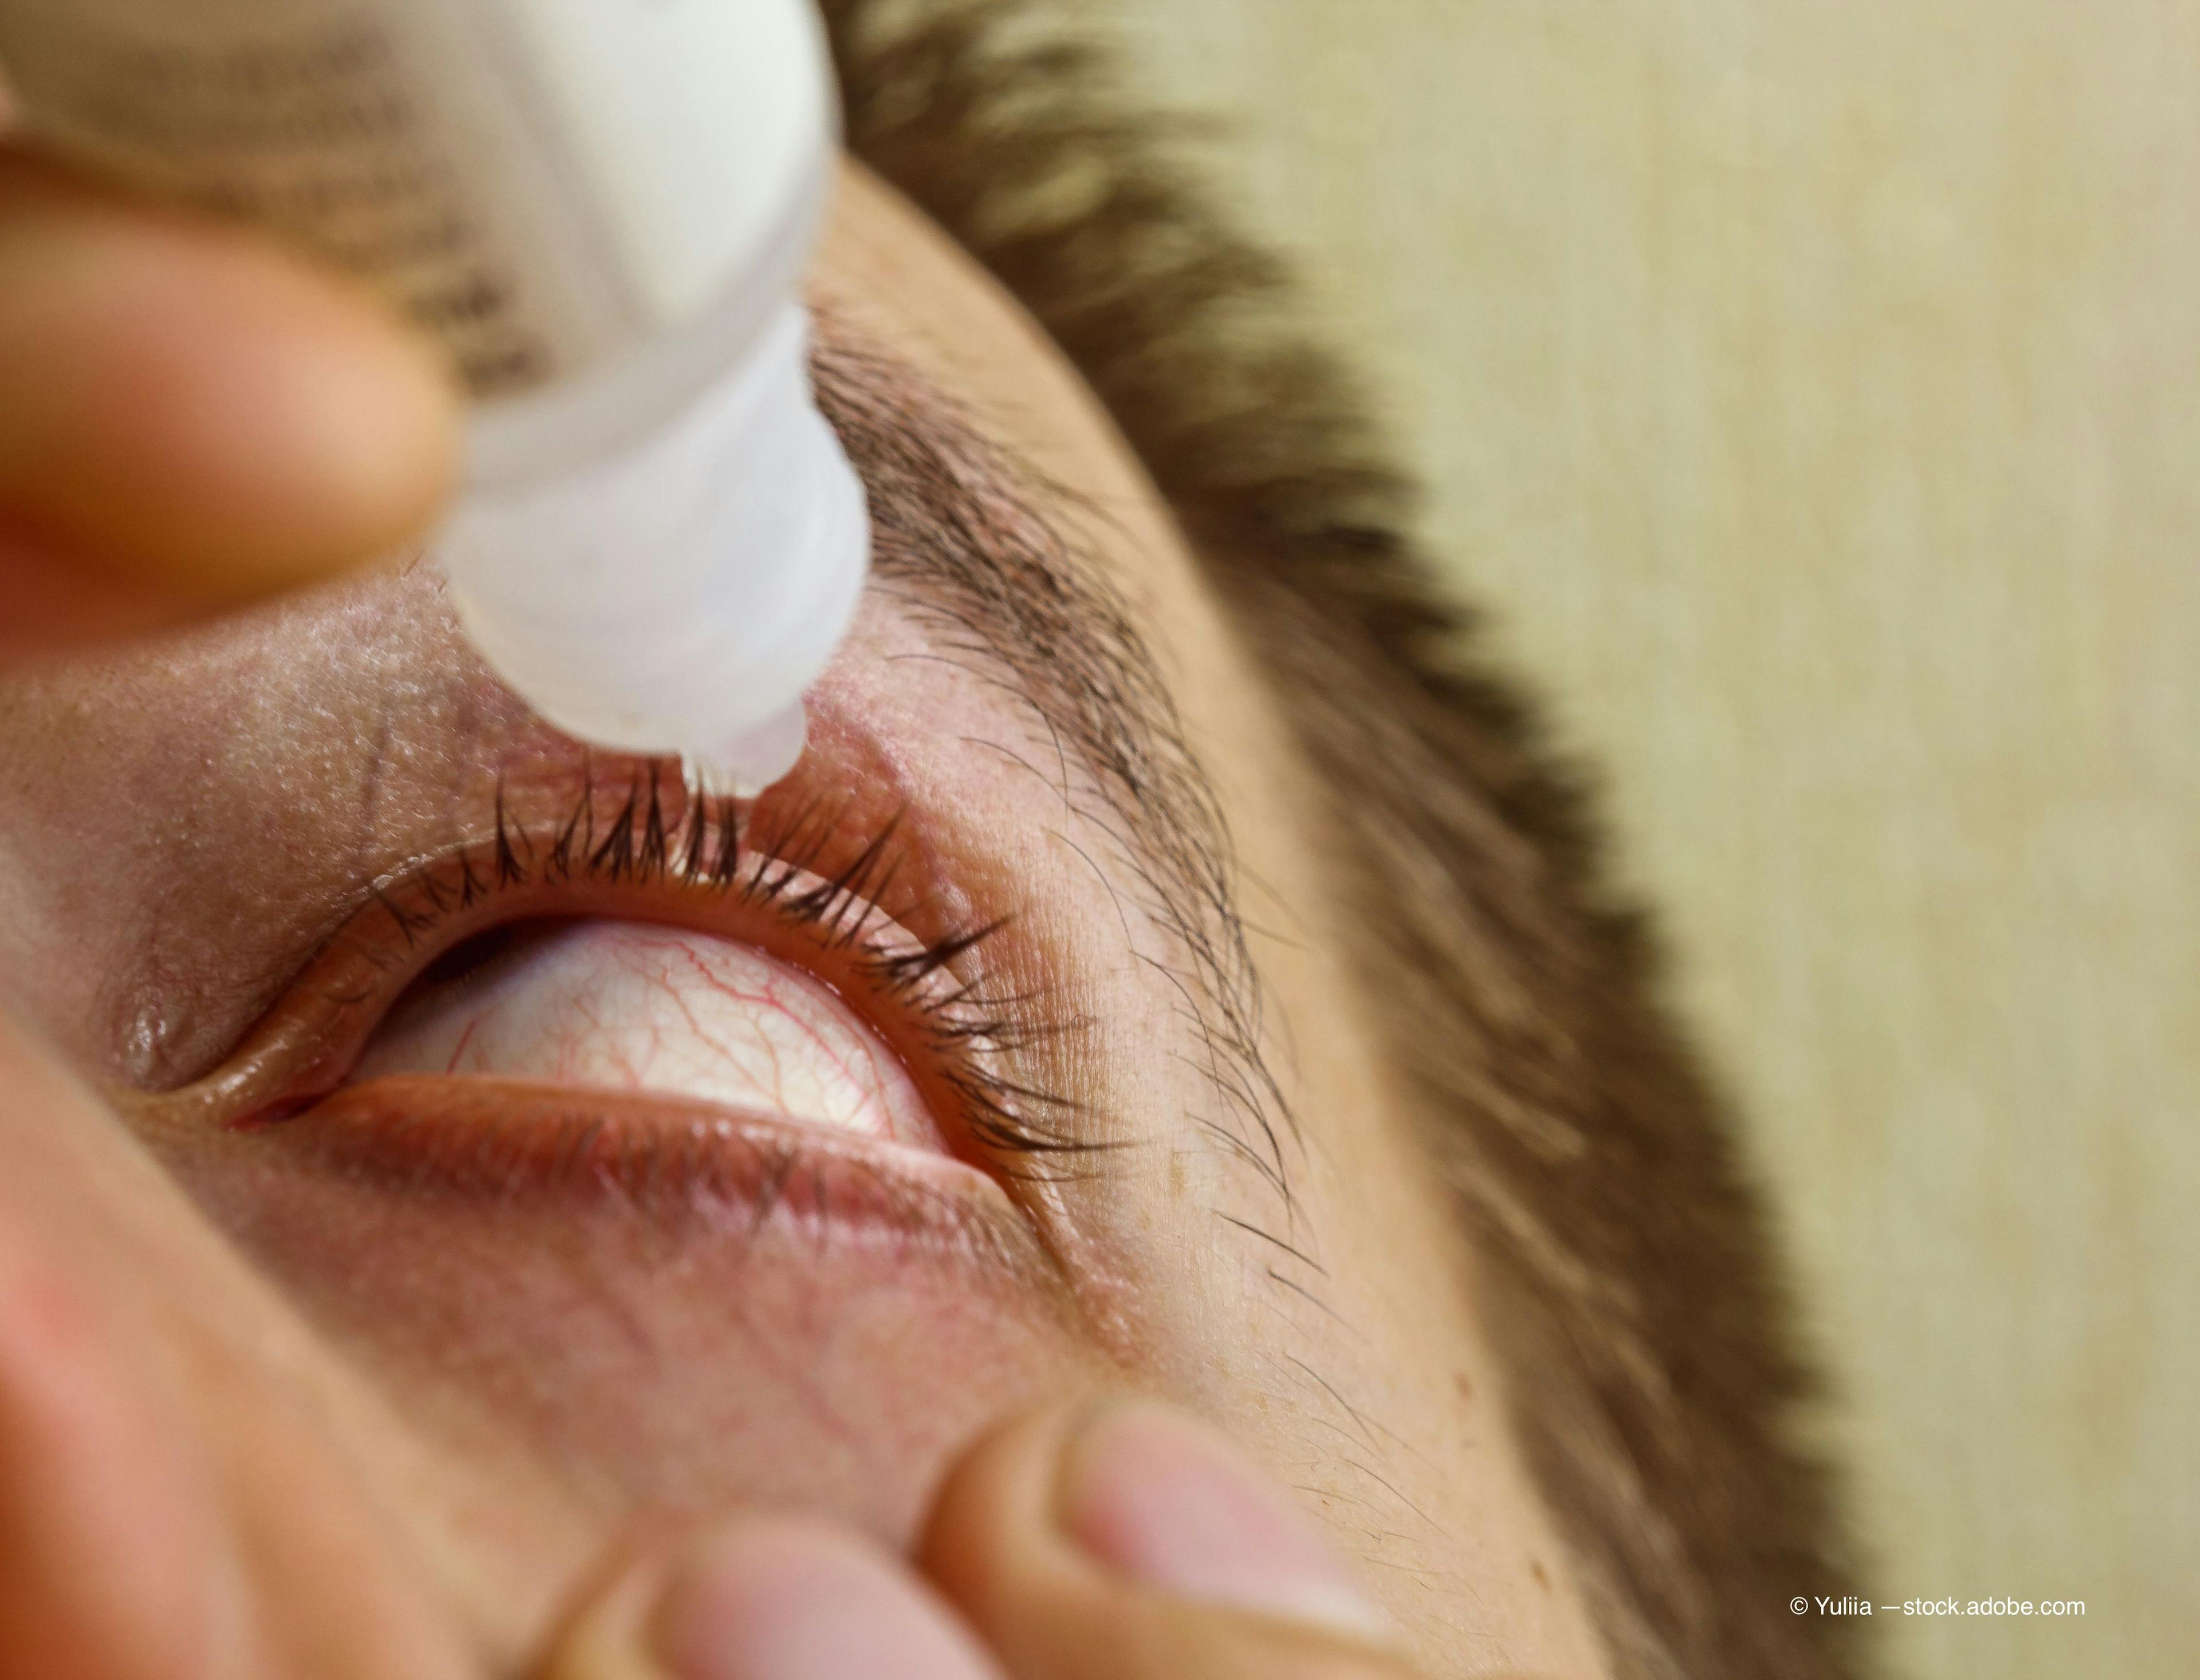 Zeroing in on dry eye treatment for patients with cataracts